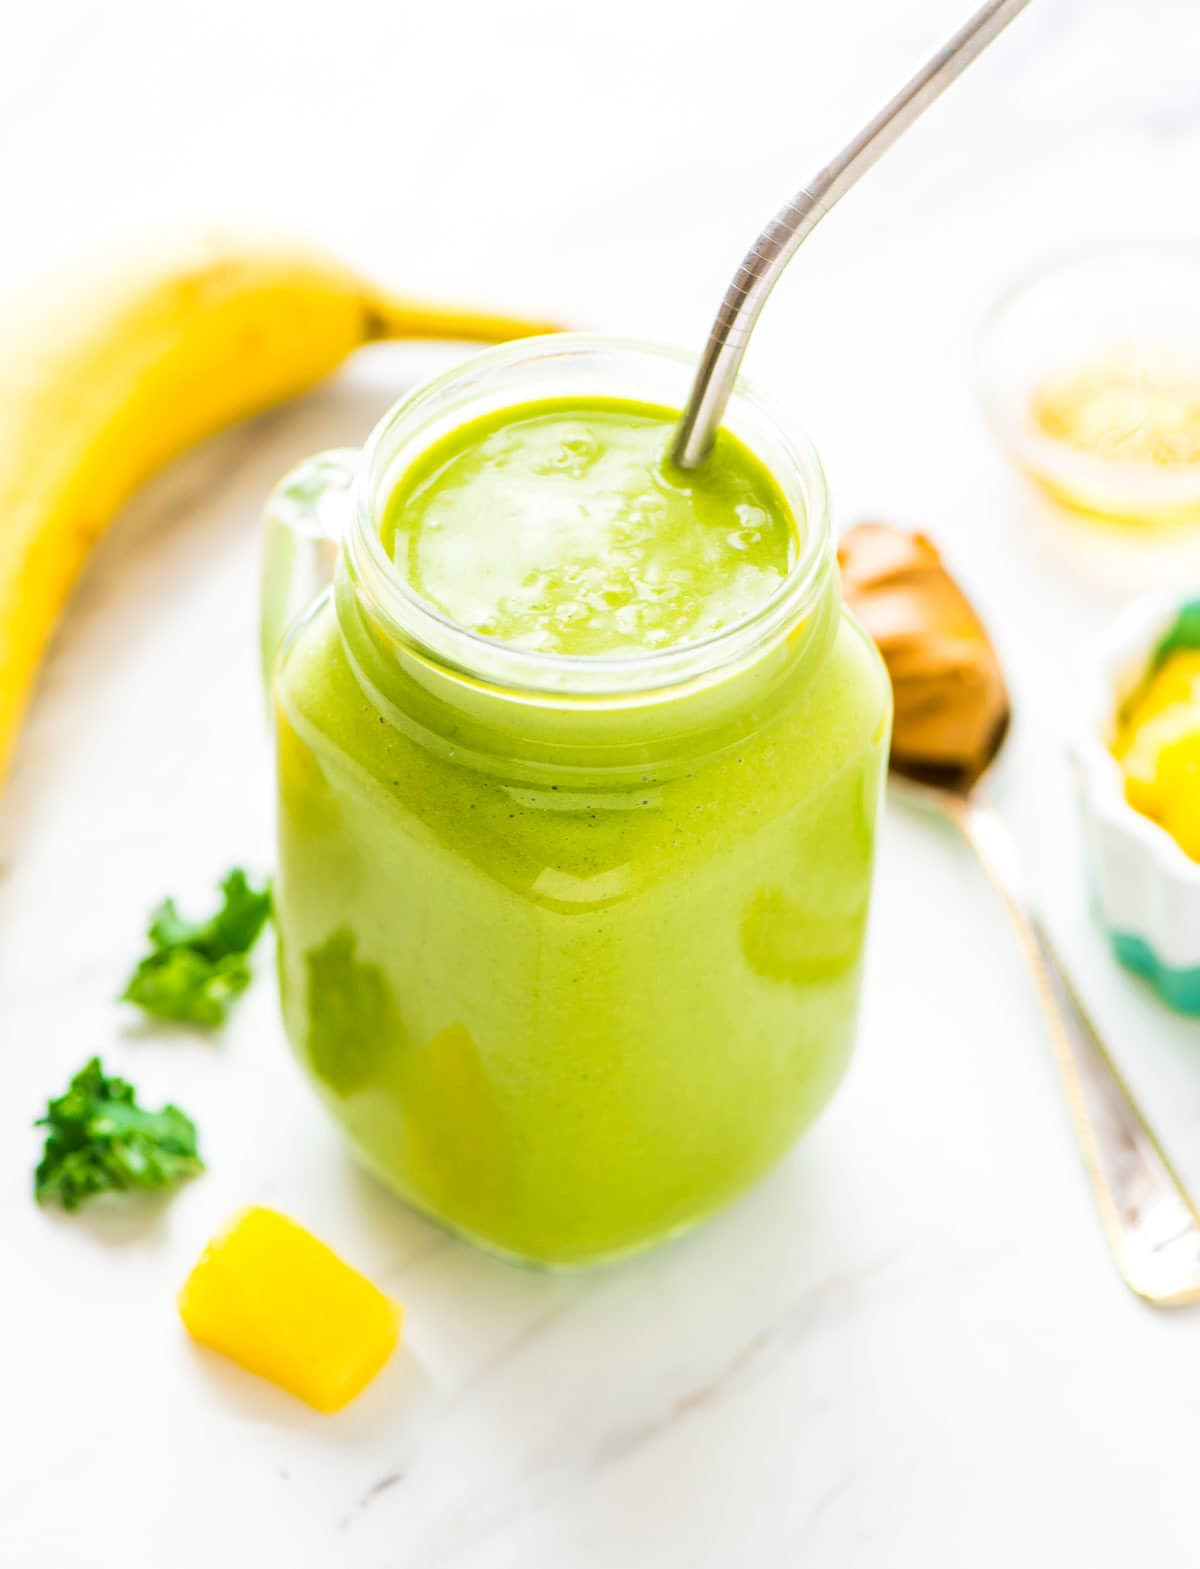 Healthy Breakfast Smoothies Recipes
 Kale Pineapple Healthy Breakfast Smoothie